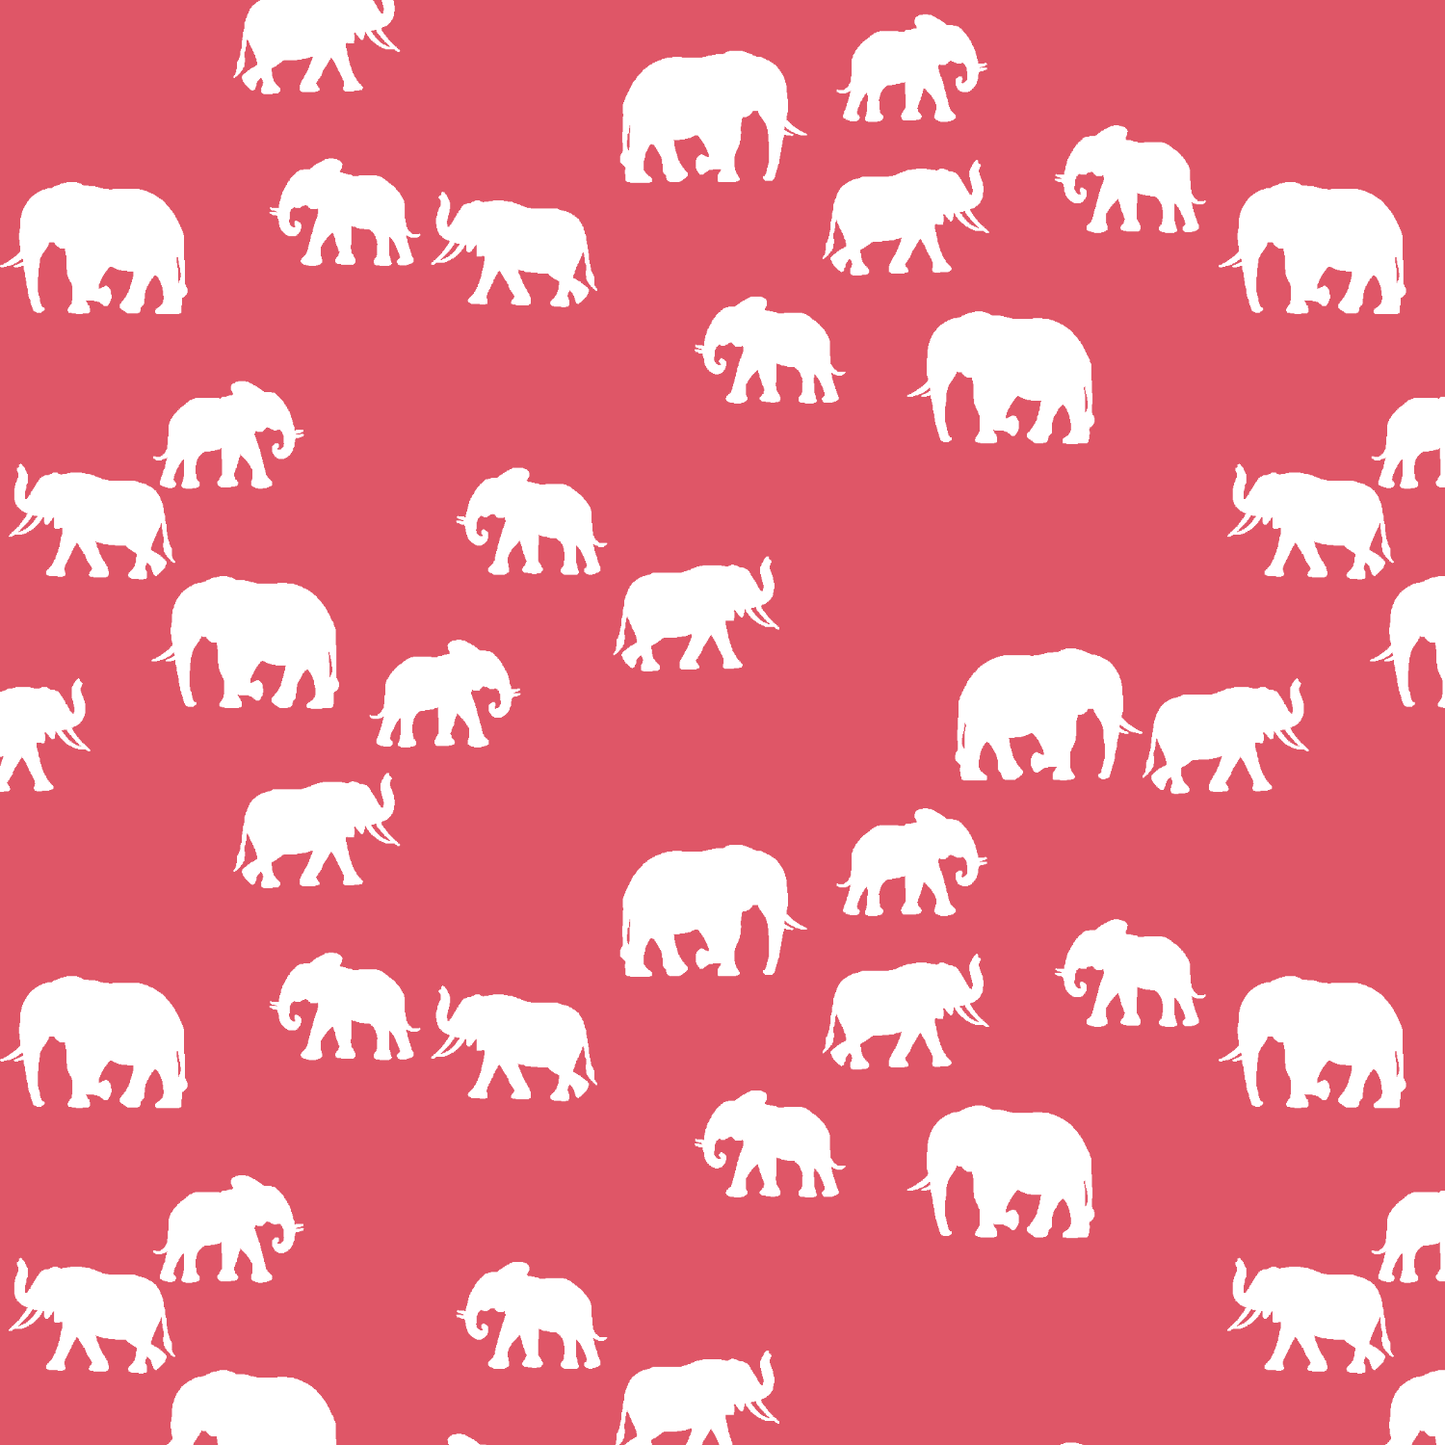 Elephant Silhouette in Passion on White